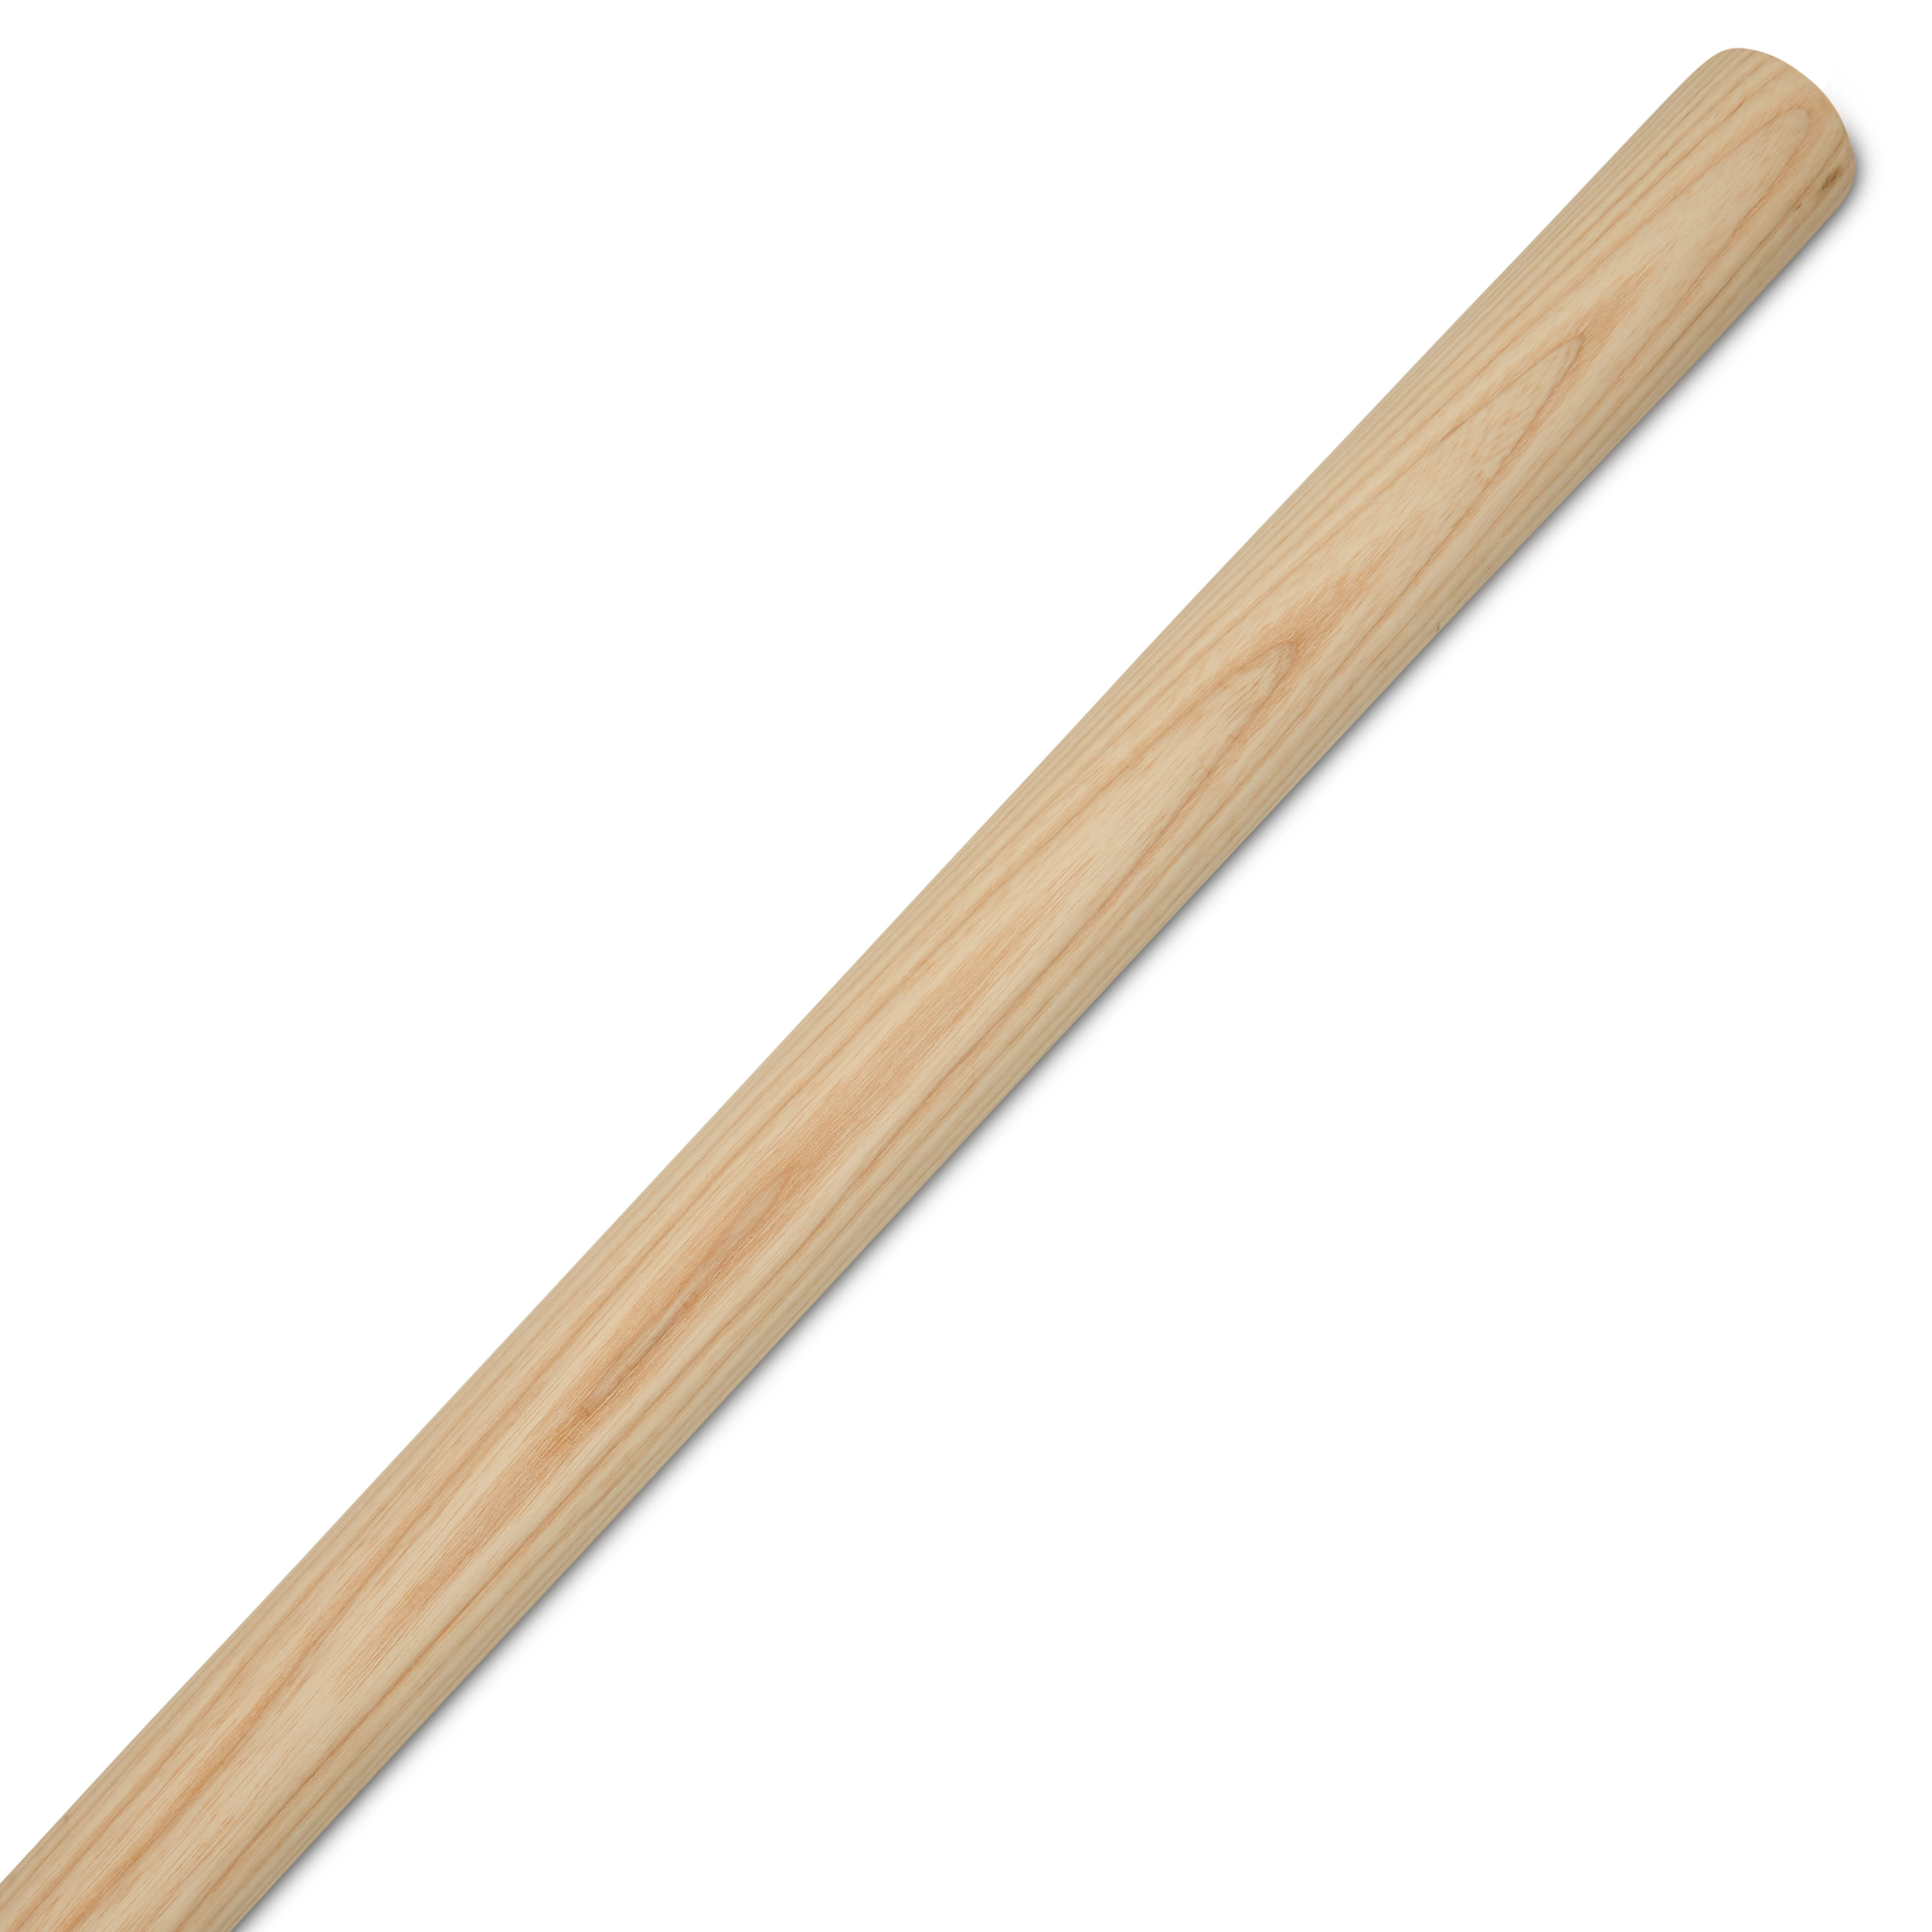 Dowel Rods Wood Sticks Wooden Dowel Rods 100 Pieces by Woodpeckers for Crafts and DIY’ers 1/2 x 36 Inch Unfinished Hardwood Birch Sticks 